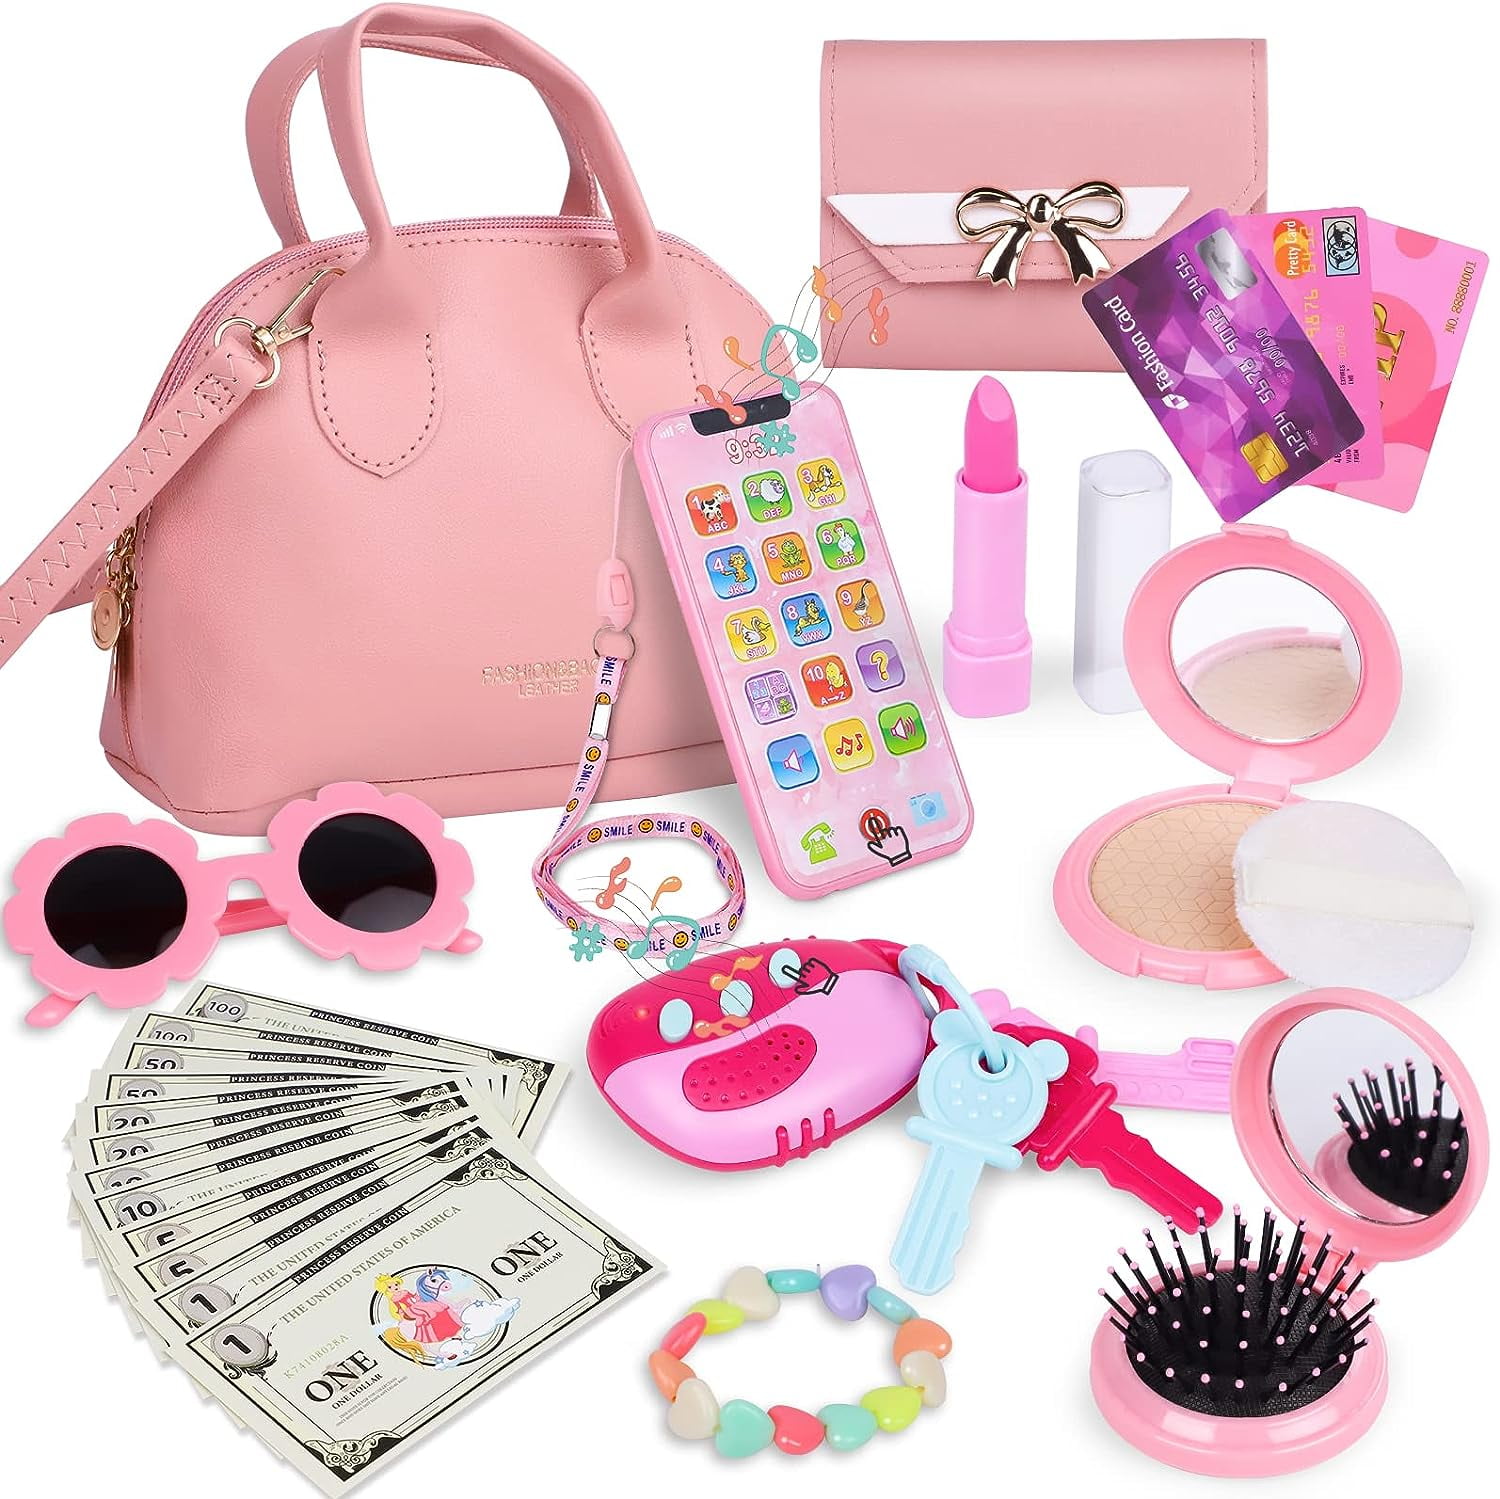 Purse for Little Girls- Kids Makeup Kit for Girls,Princess Play Purse Toy  with Cosmetics Accessories…See more Purse for Little Girls- Kids Makeup Kit